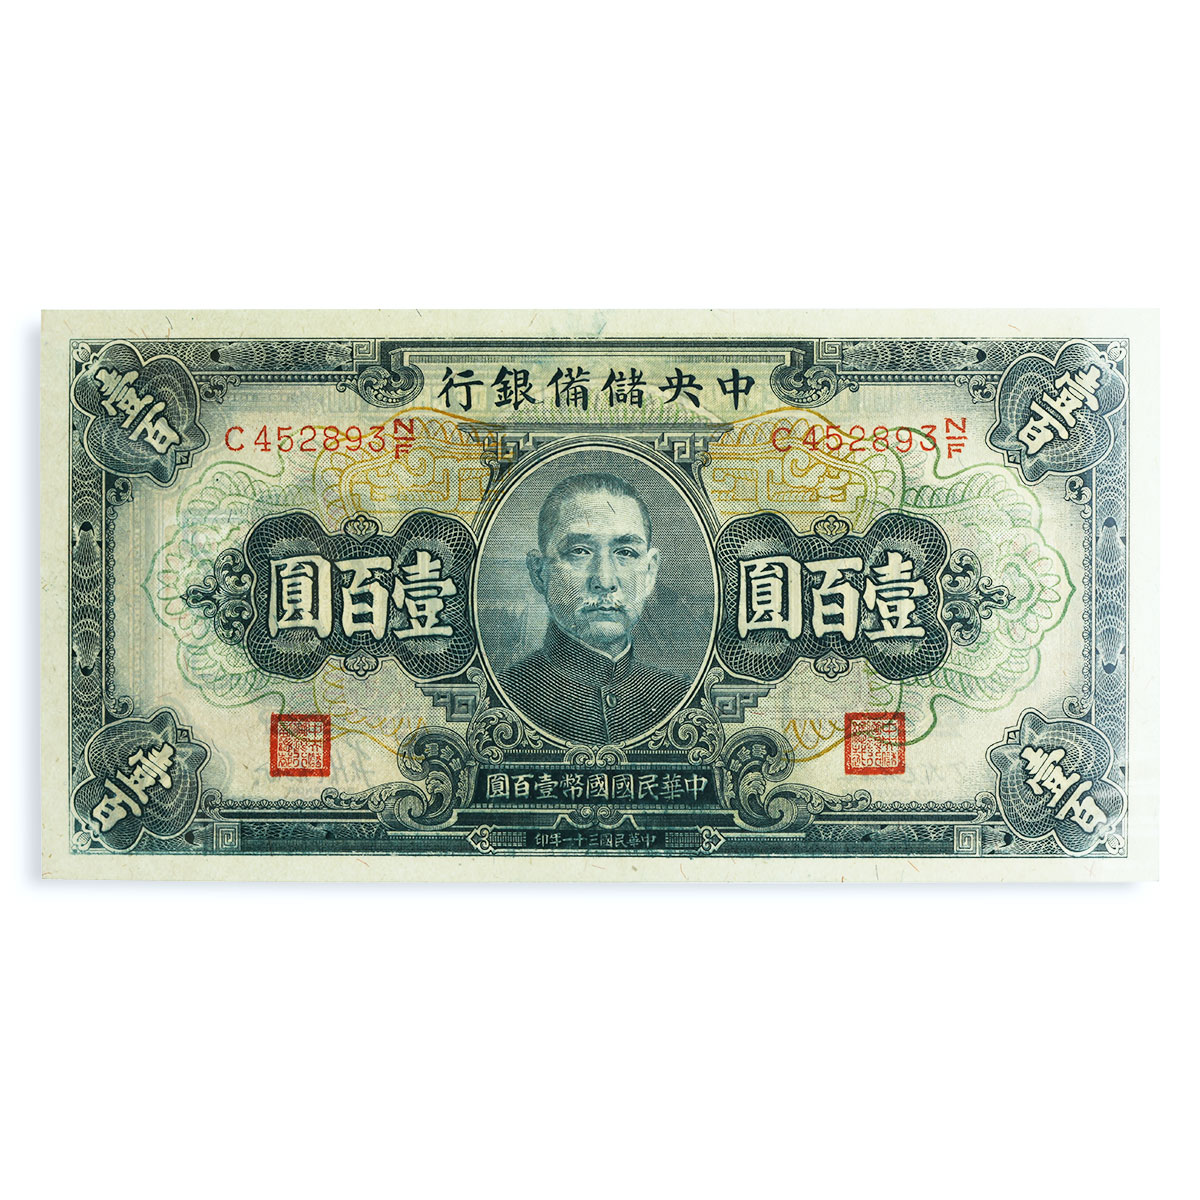 China 100 yuan Banknote Japanese Puppet Banks Issue Paper Cash PPQ65 PCGS 1942